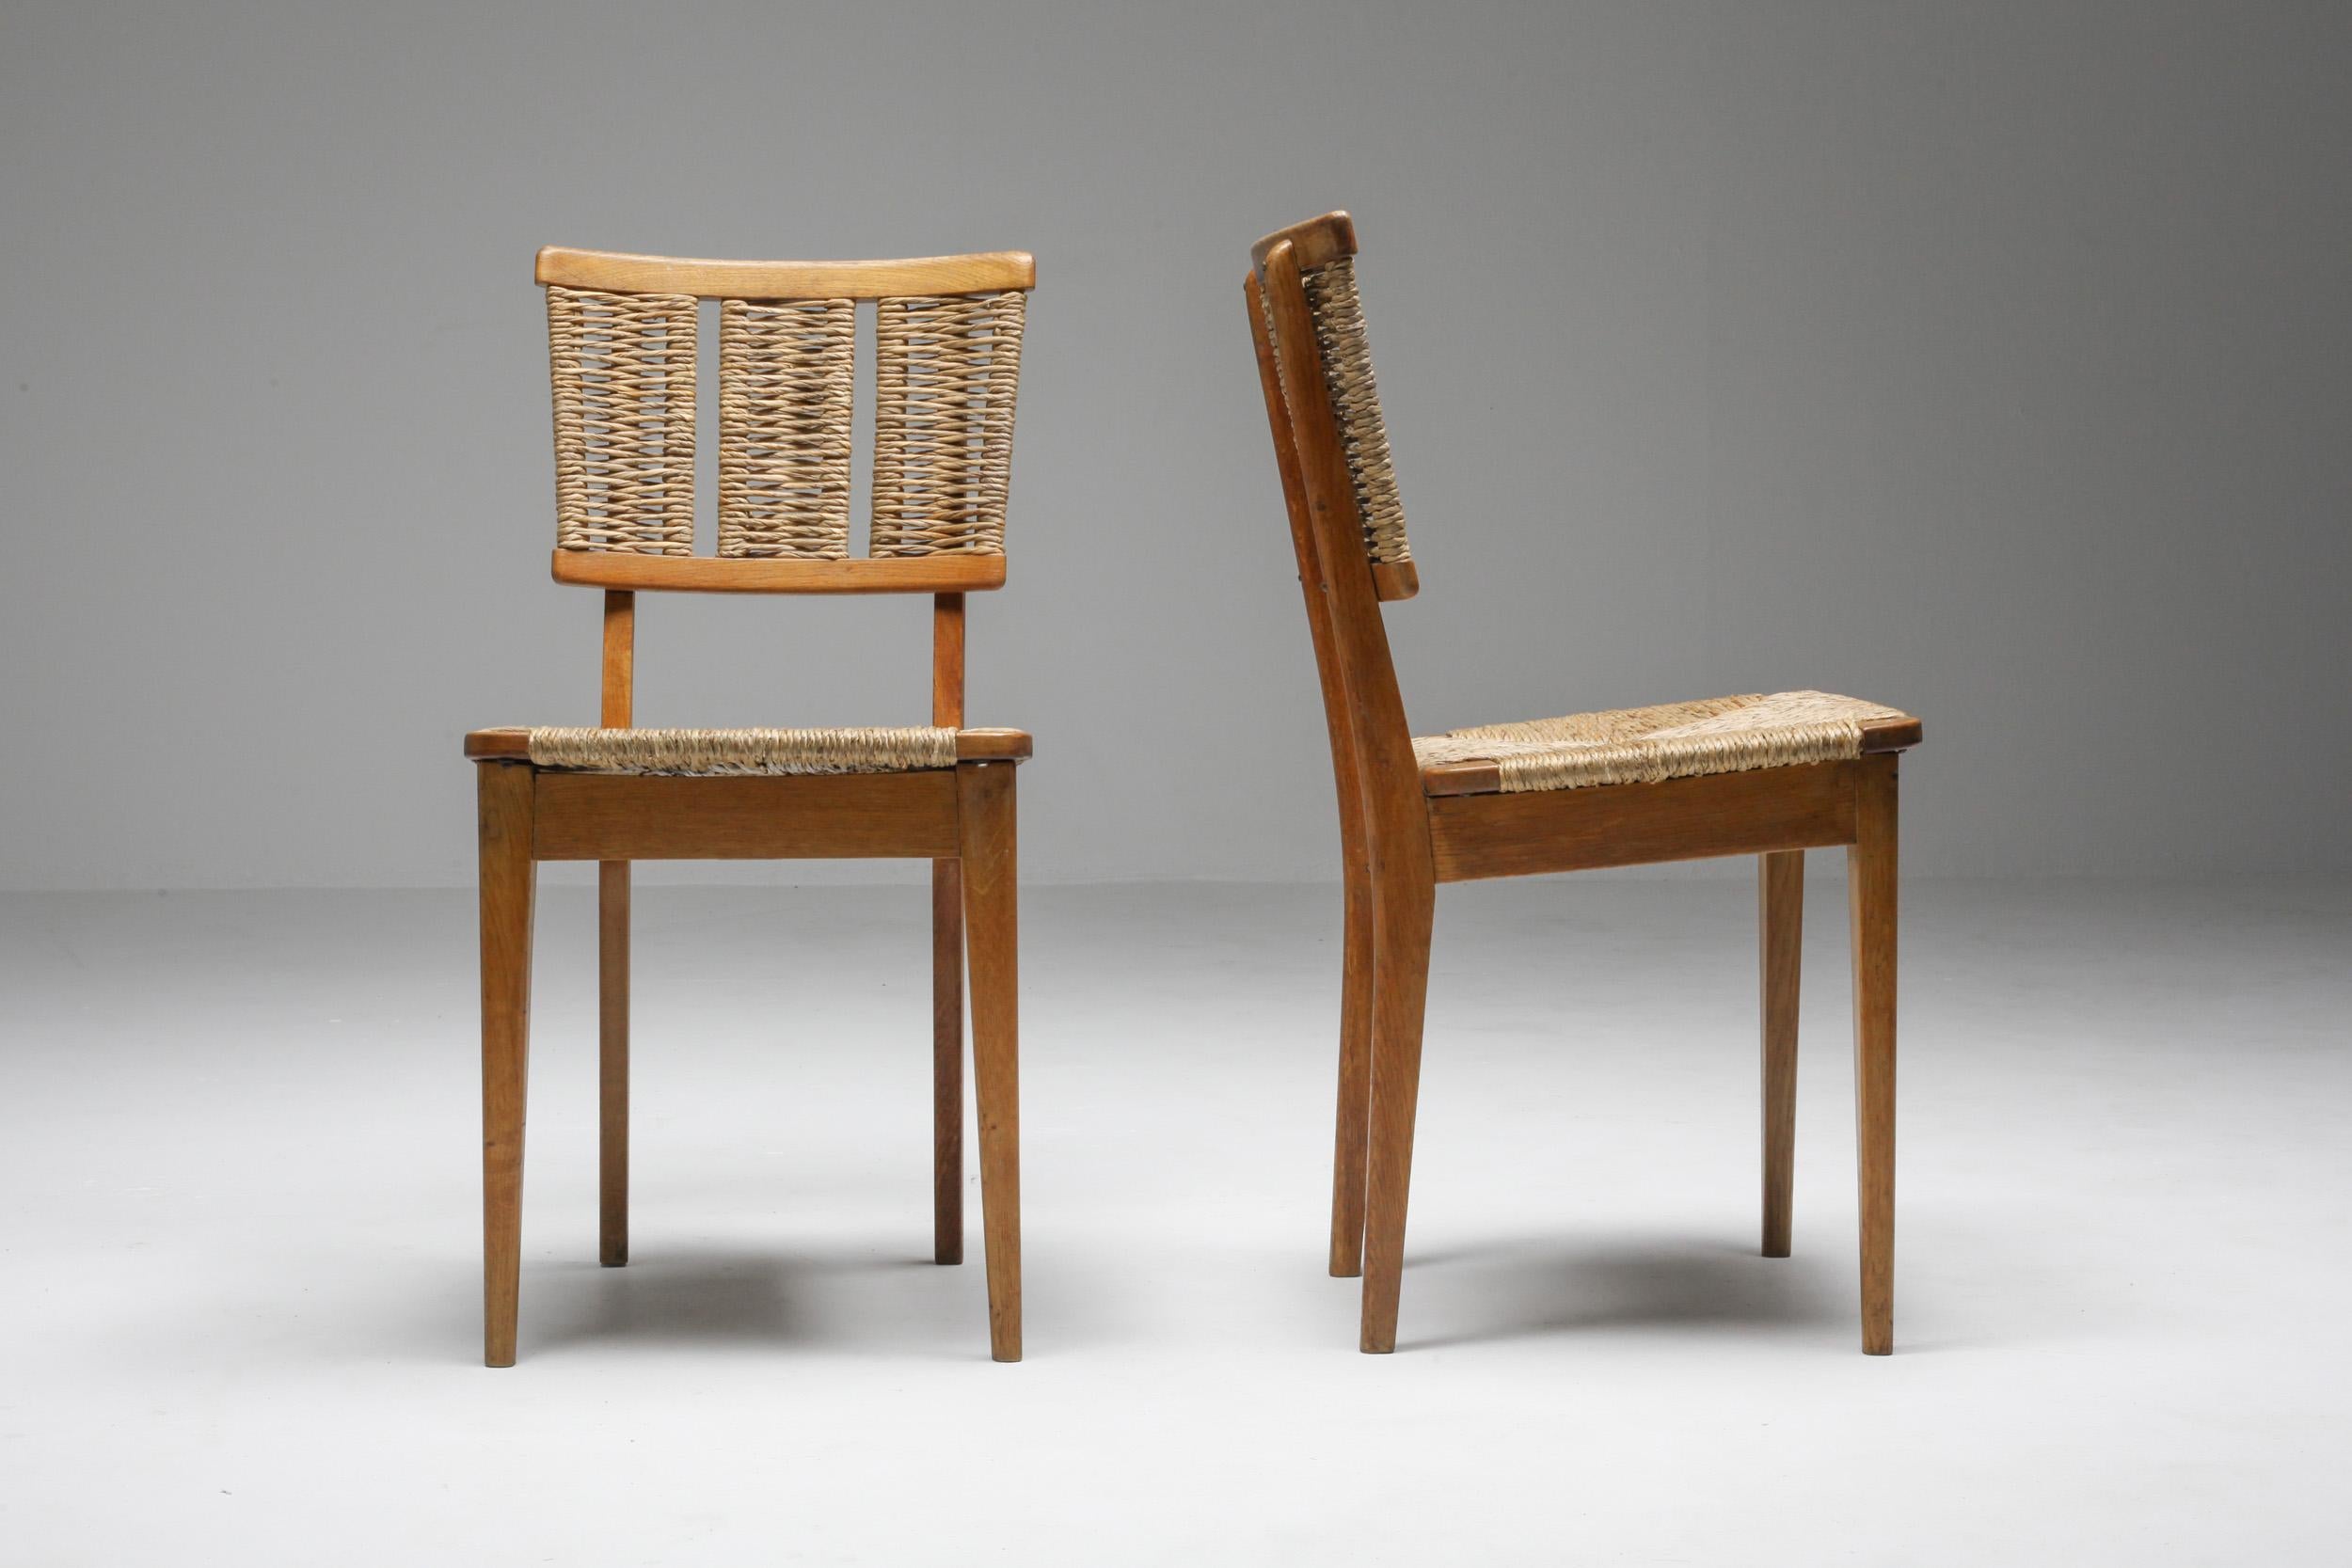 Dutch Mart Stam 'A2-1' Chairs in Oak and Straw, 1947